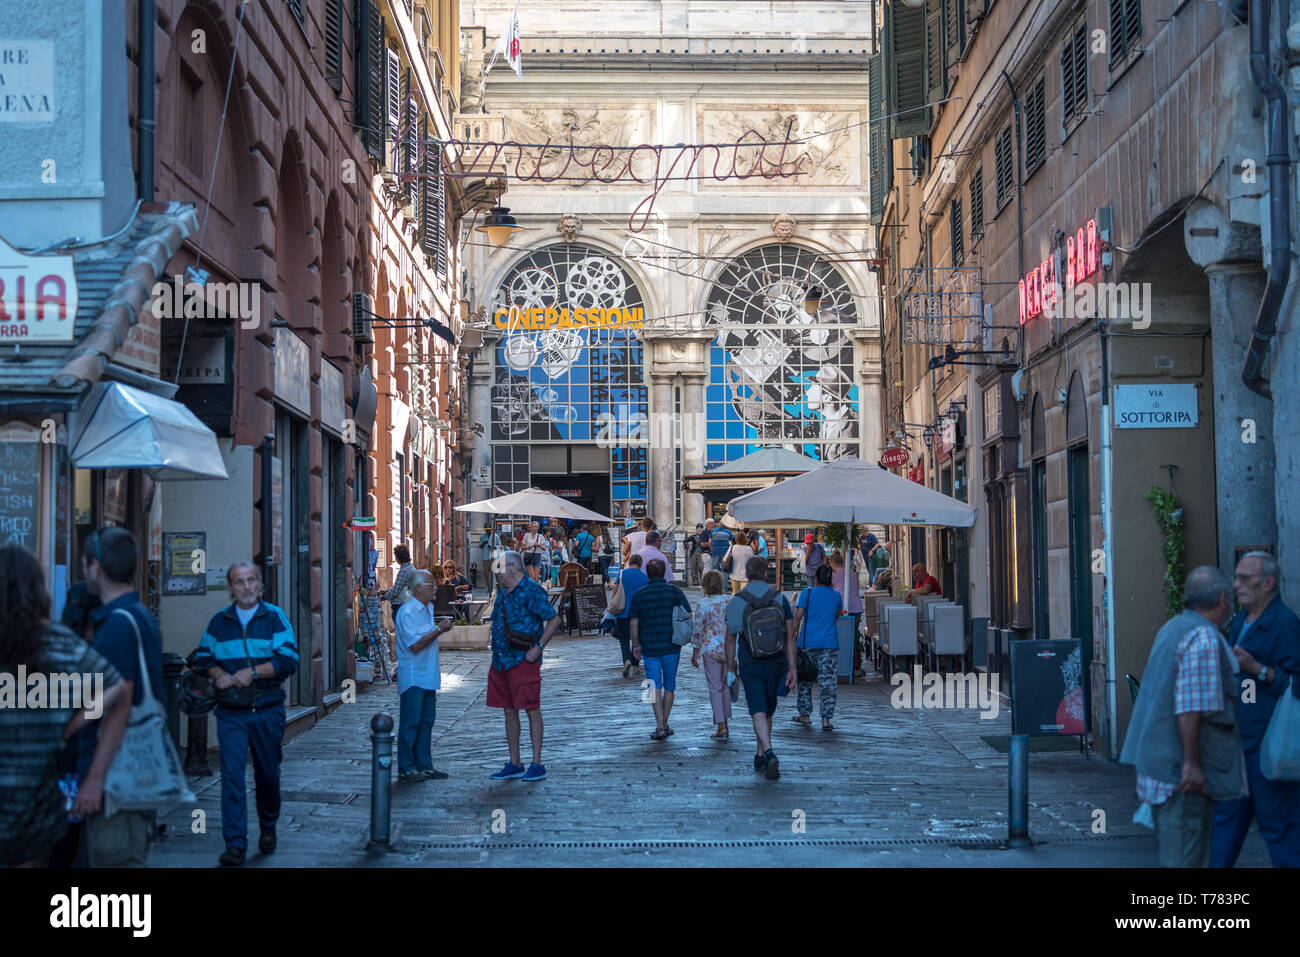 Genoa, Genova, Italy: Tourists and locals walking around piazza Banchi and Loggia della Mercanzia in the old town, with traditional bar dehors Stock Photo